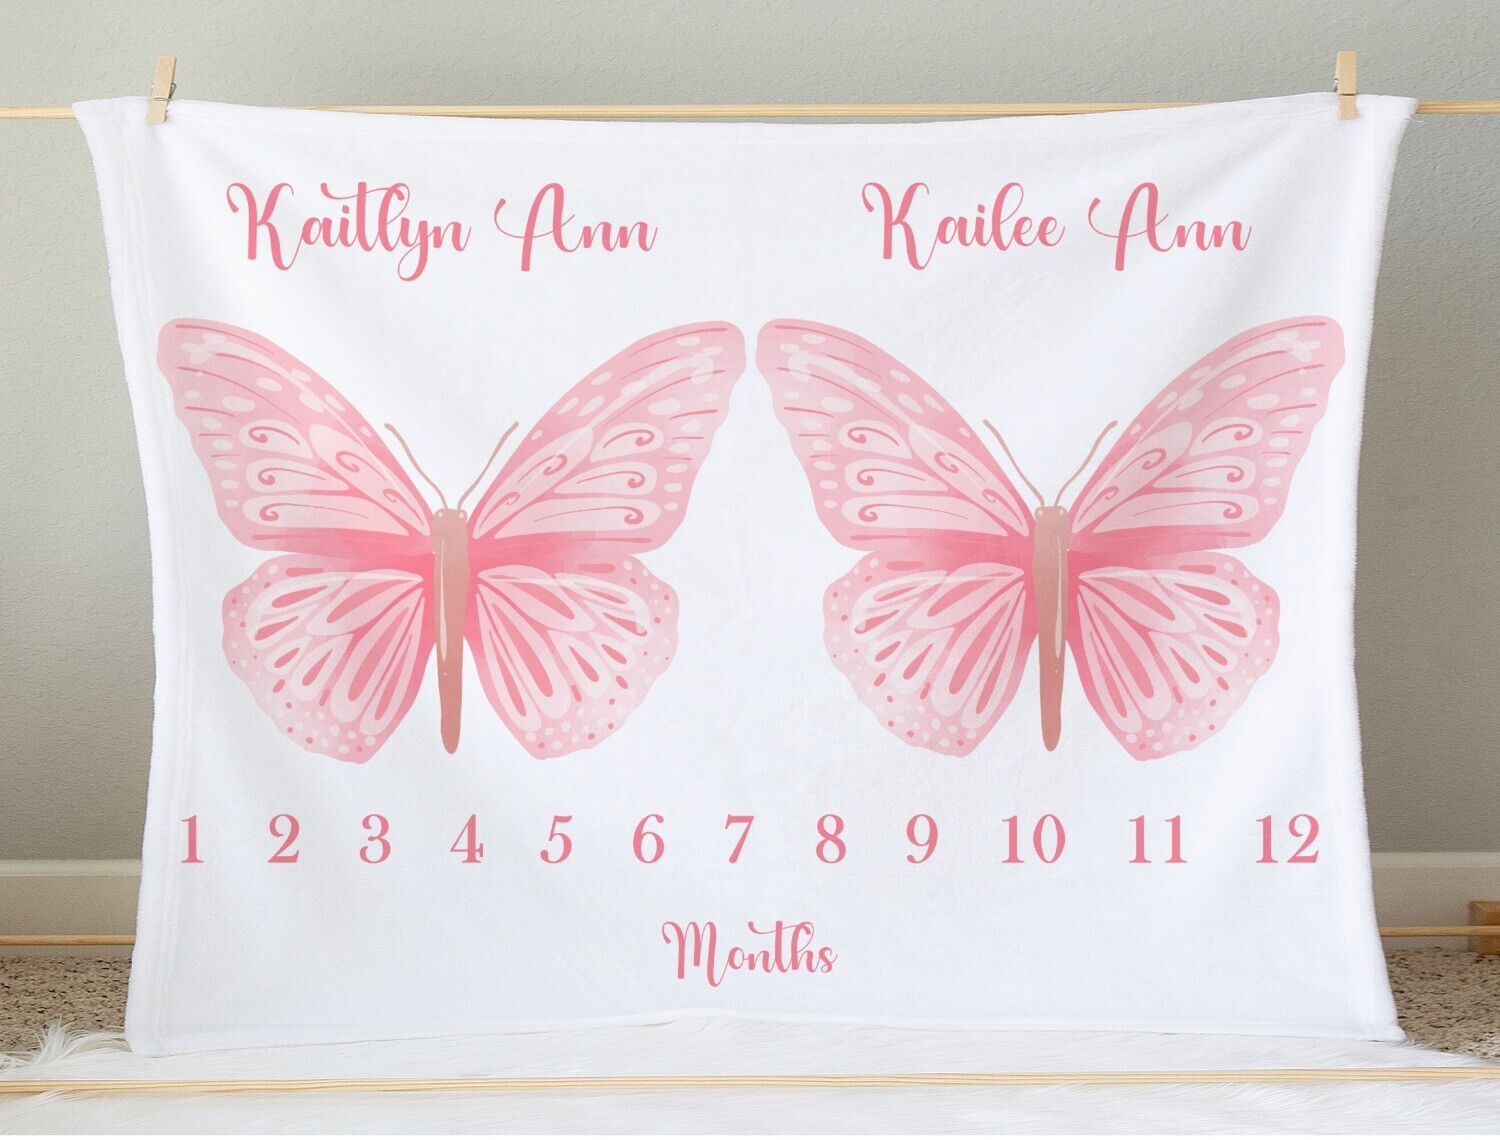 Twin Baby Girls Milestone Blanket Personalized Pink Butterfly Baby Blanket Photo Op Nursery Decor New Baby Shower Gift Crib Blanket Tummy Time